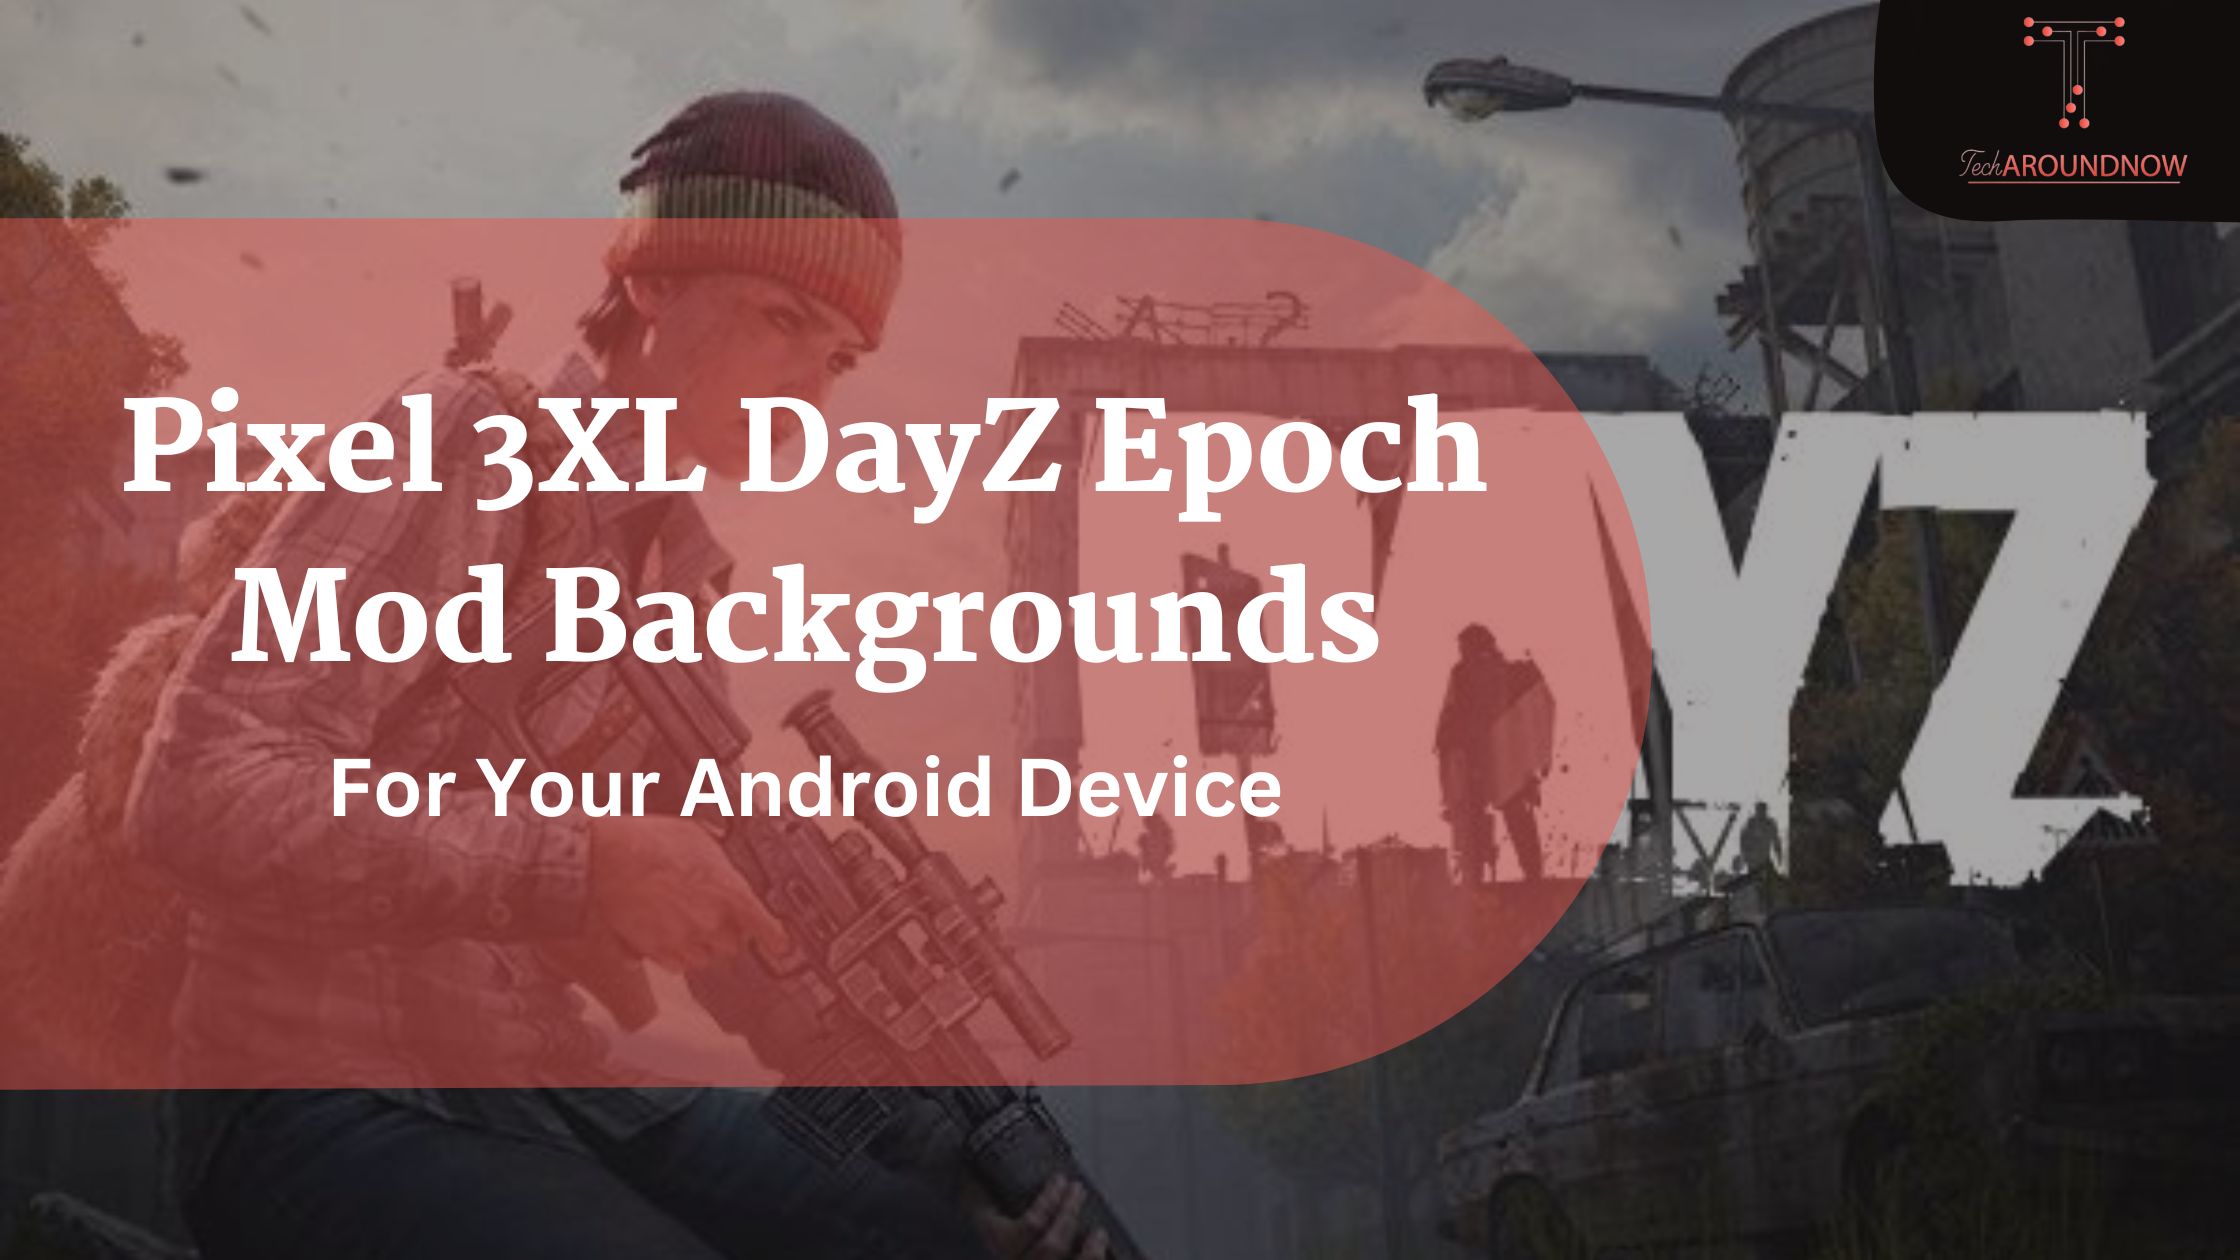 get these Pixel 3XL DayZ Epoch Mod backgrounds today!